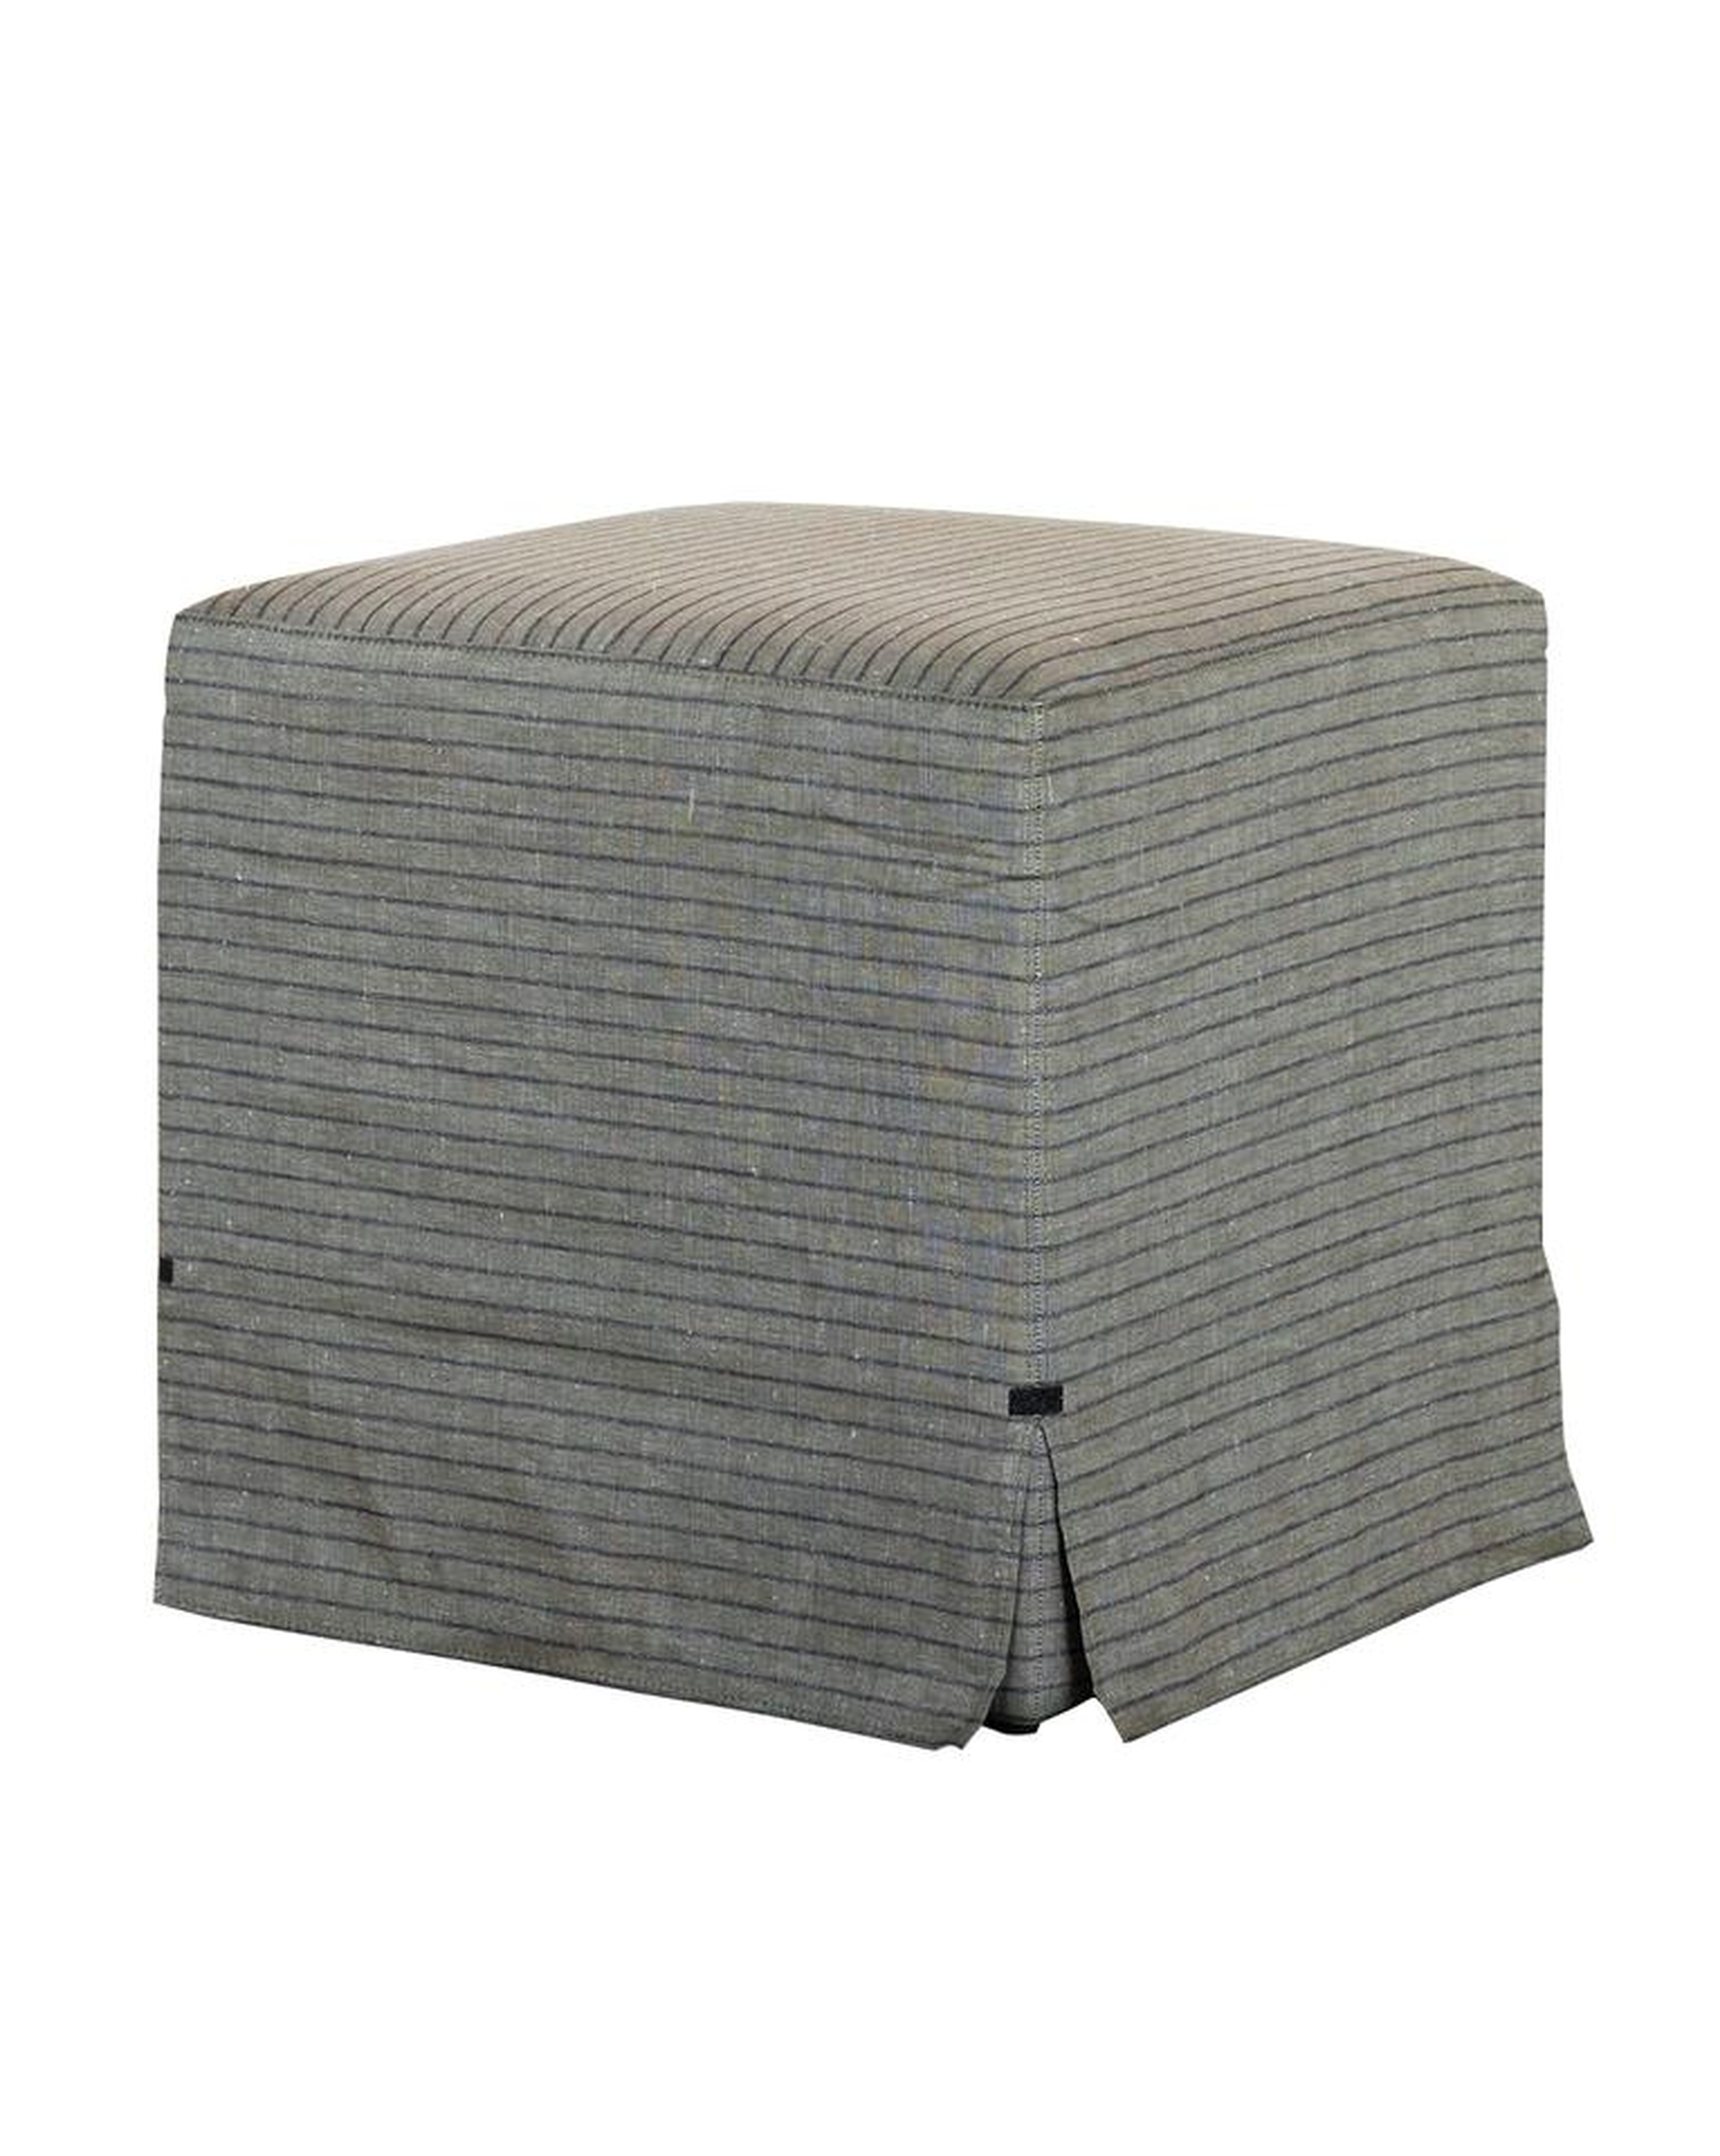 SOPHIE SLIPCOVER OTTOMAN - McGee & Co.